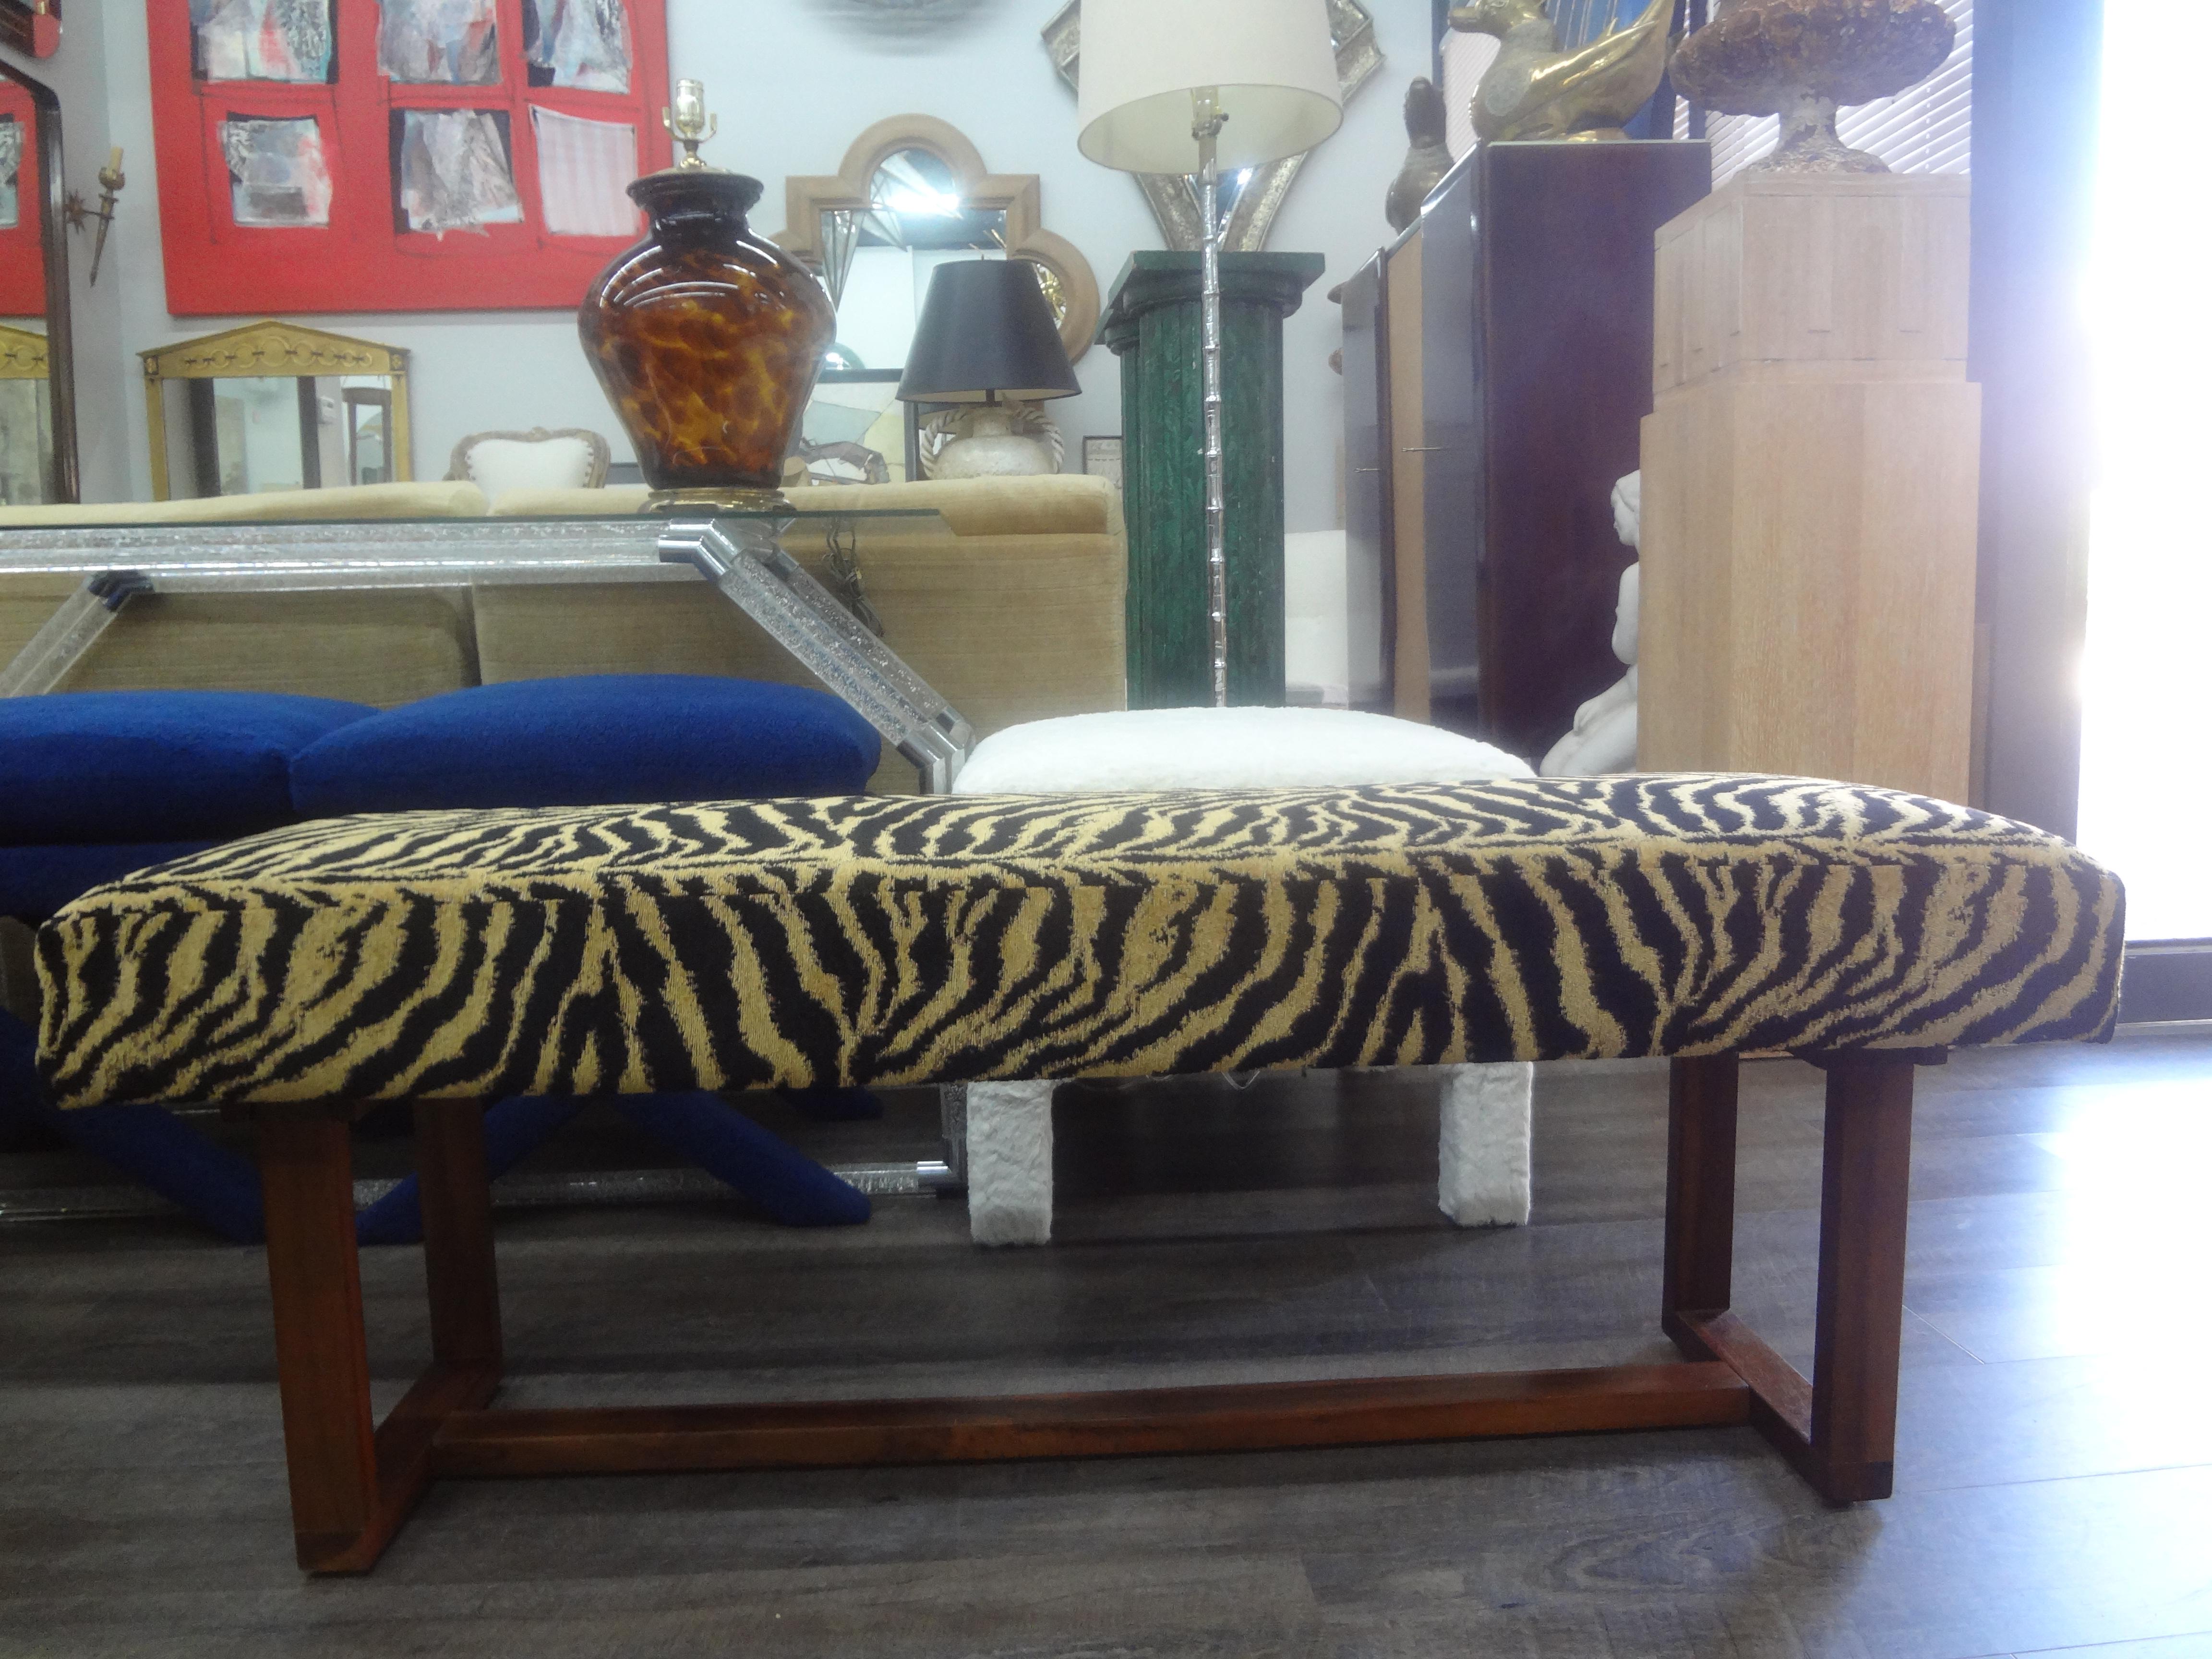 Mid Century Scandinavian Modern Teak Bench.
This stunning modernist teak bench has been professionally upholstered in black and gold tiger print chenille fabric. Great for a hall or at the end of a bed. Easily reupholstered if desired.
We have